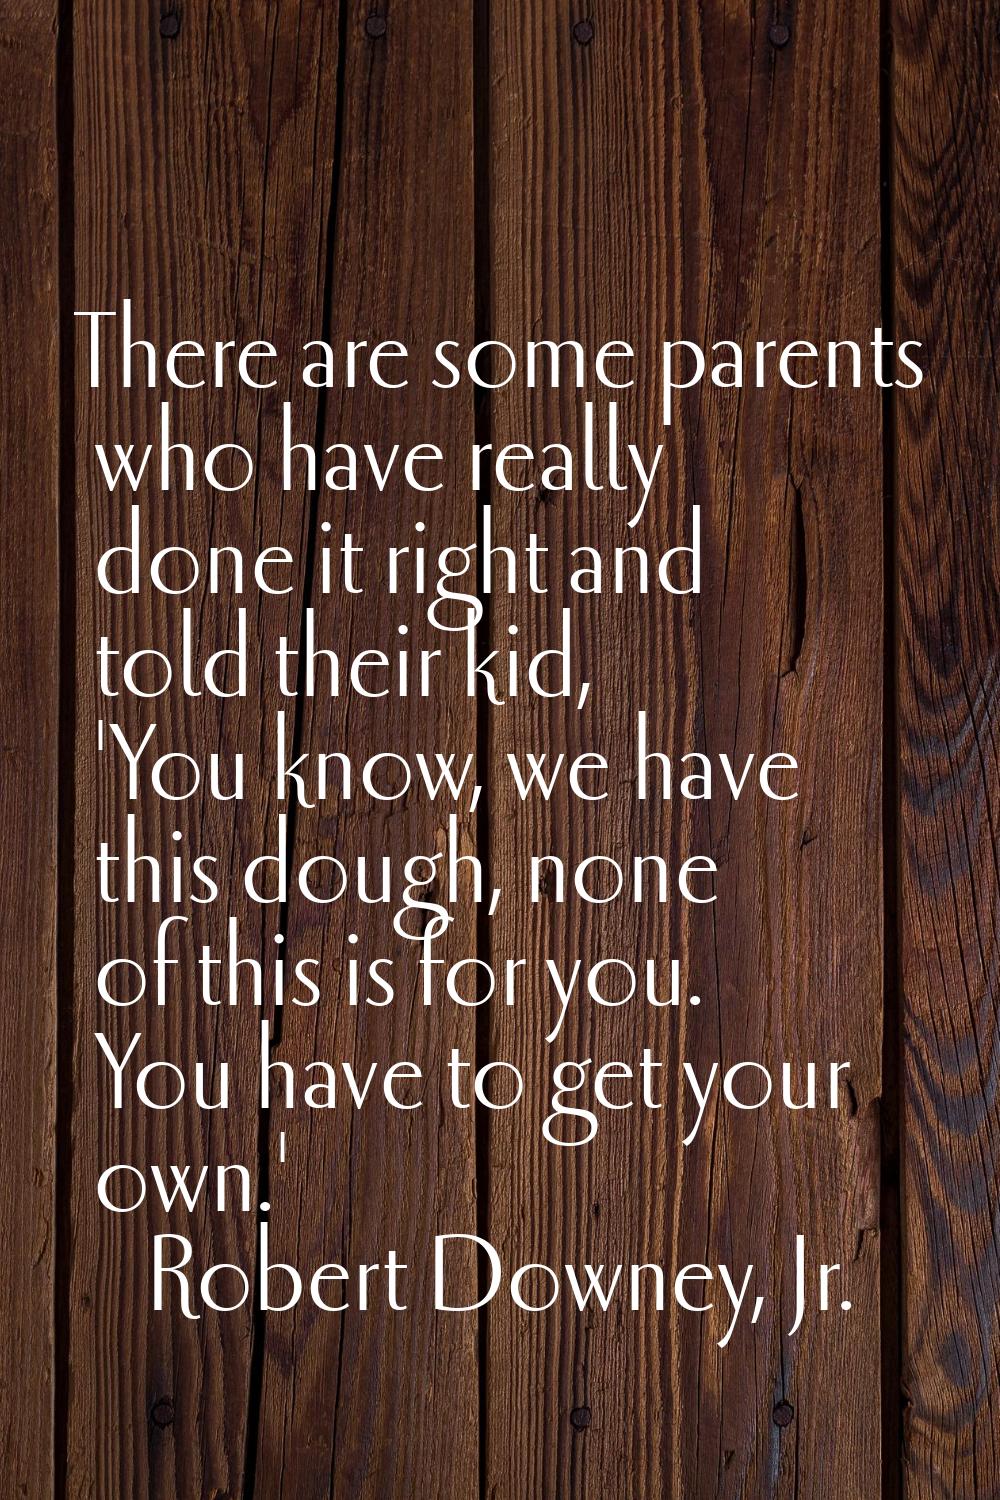 There are some parents who have really done it right and told their kid, 'You know, we have this do